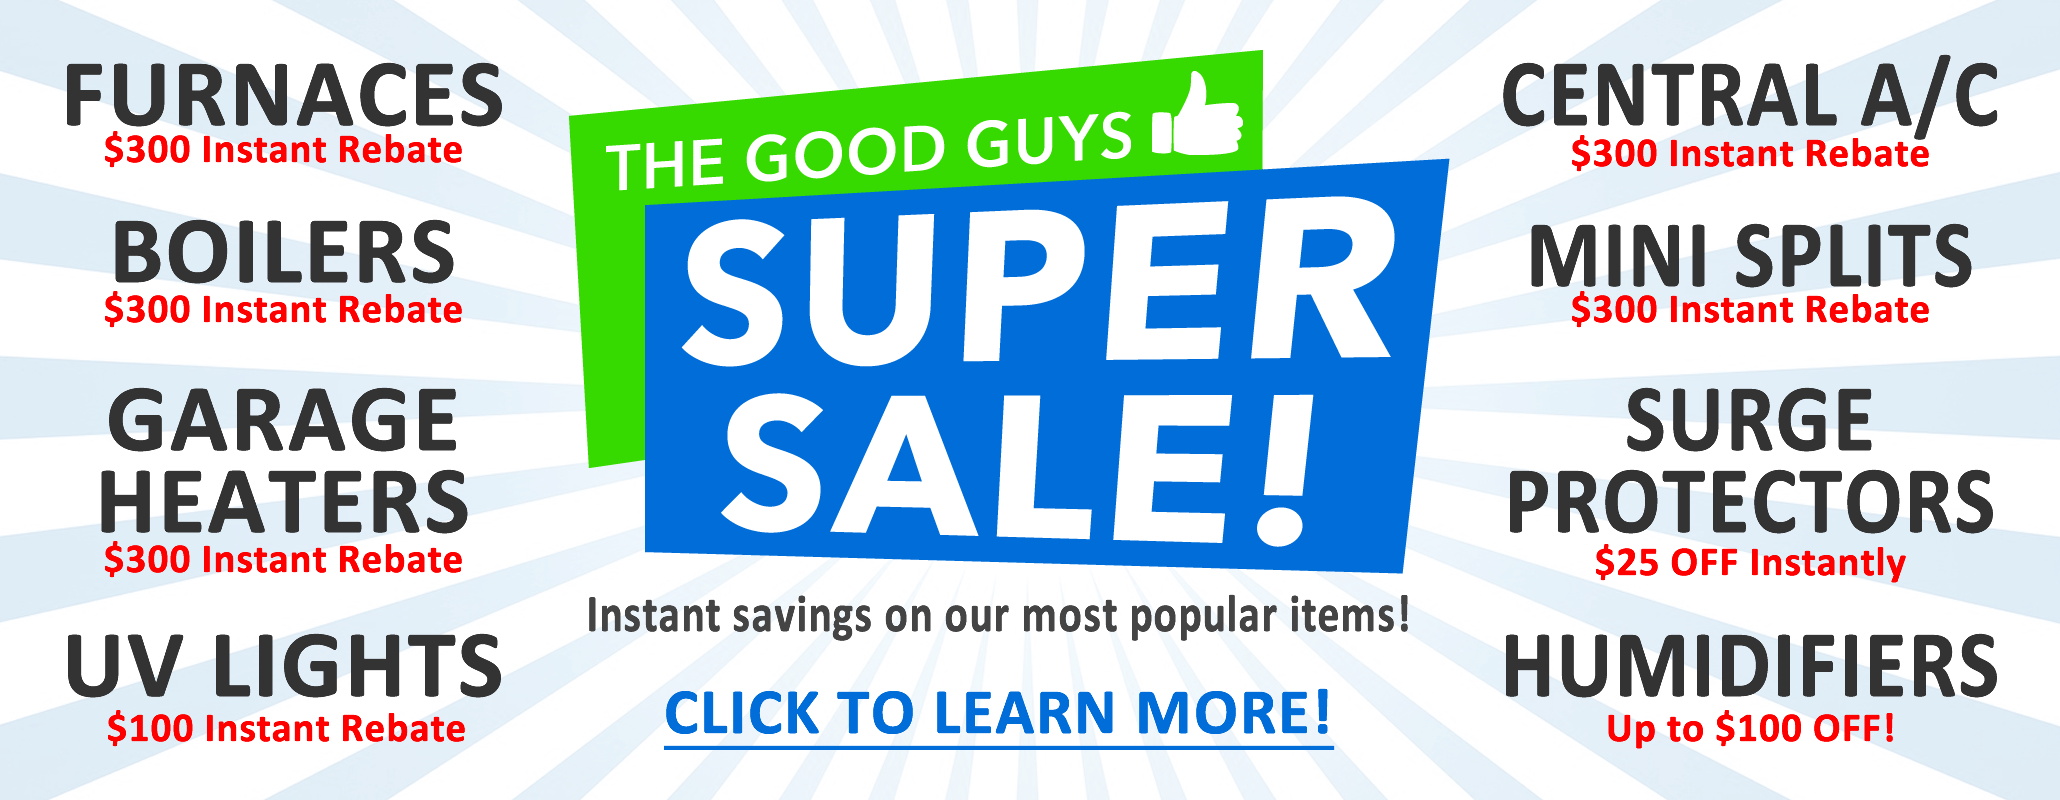 Super Sale from the Good Guys going on now. Save big money on our most popular items. Act quick, these specials won't last for long!